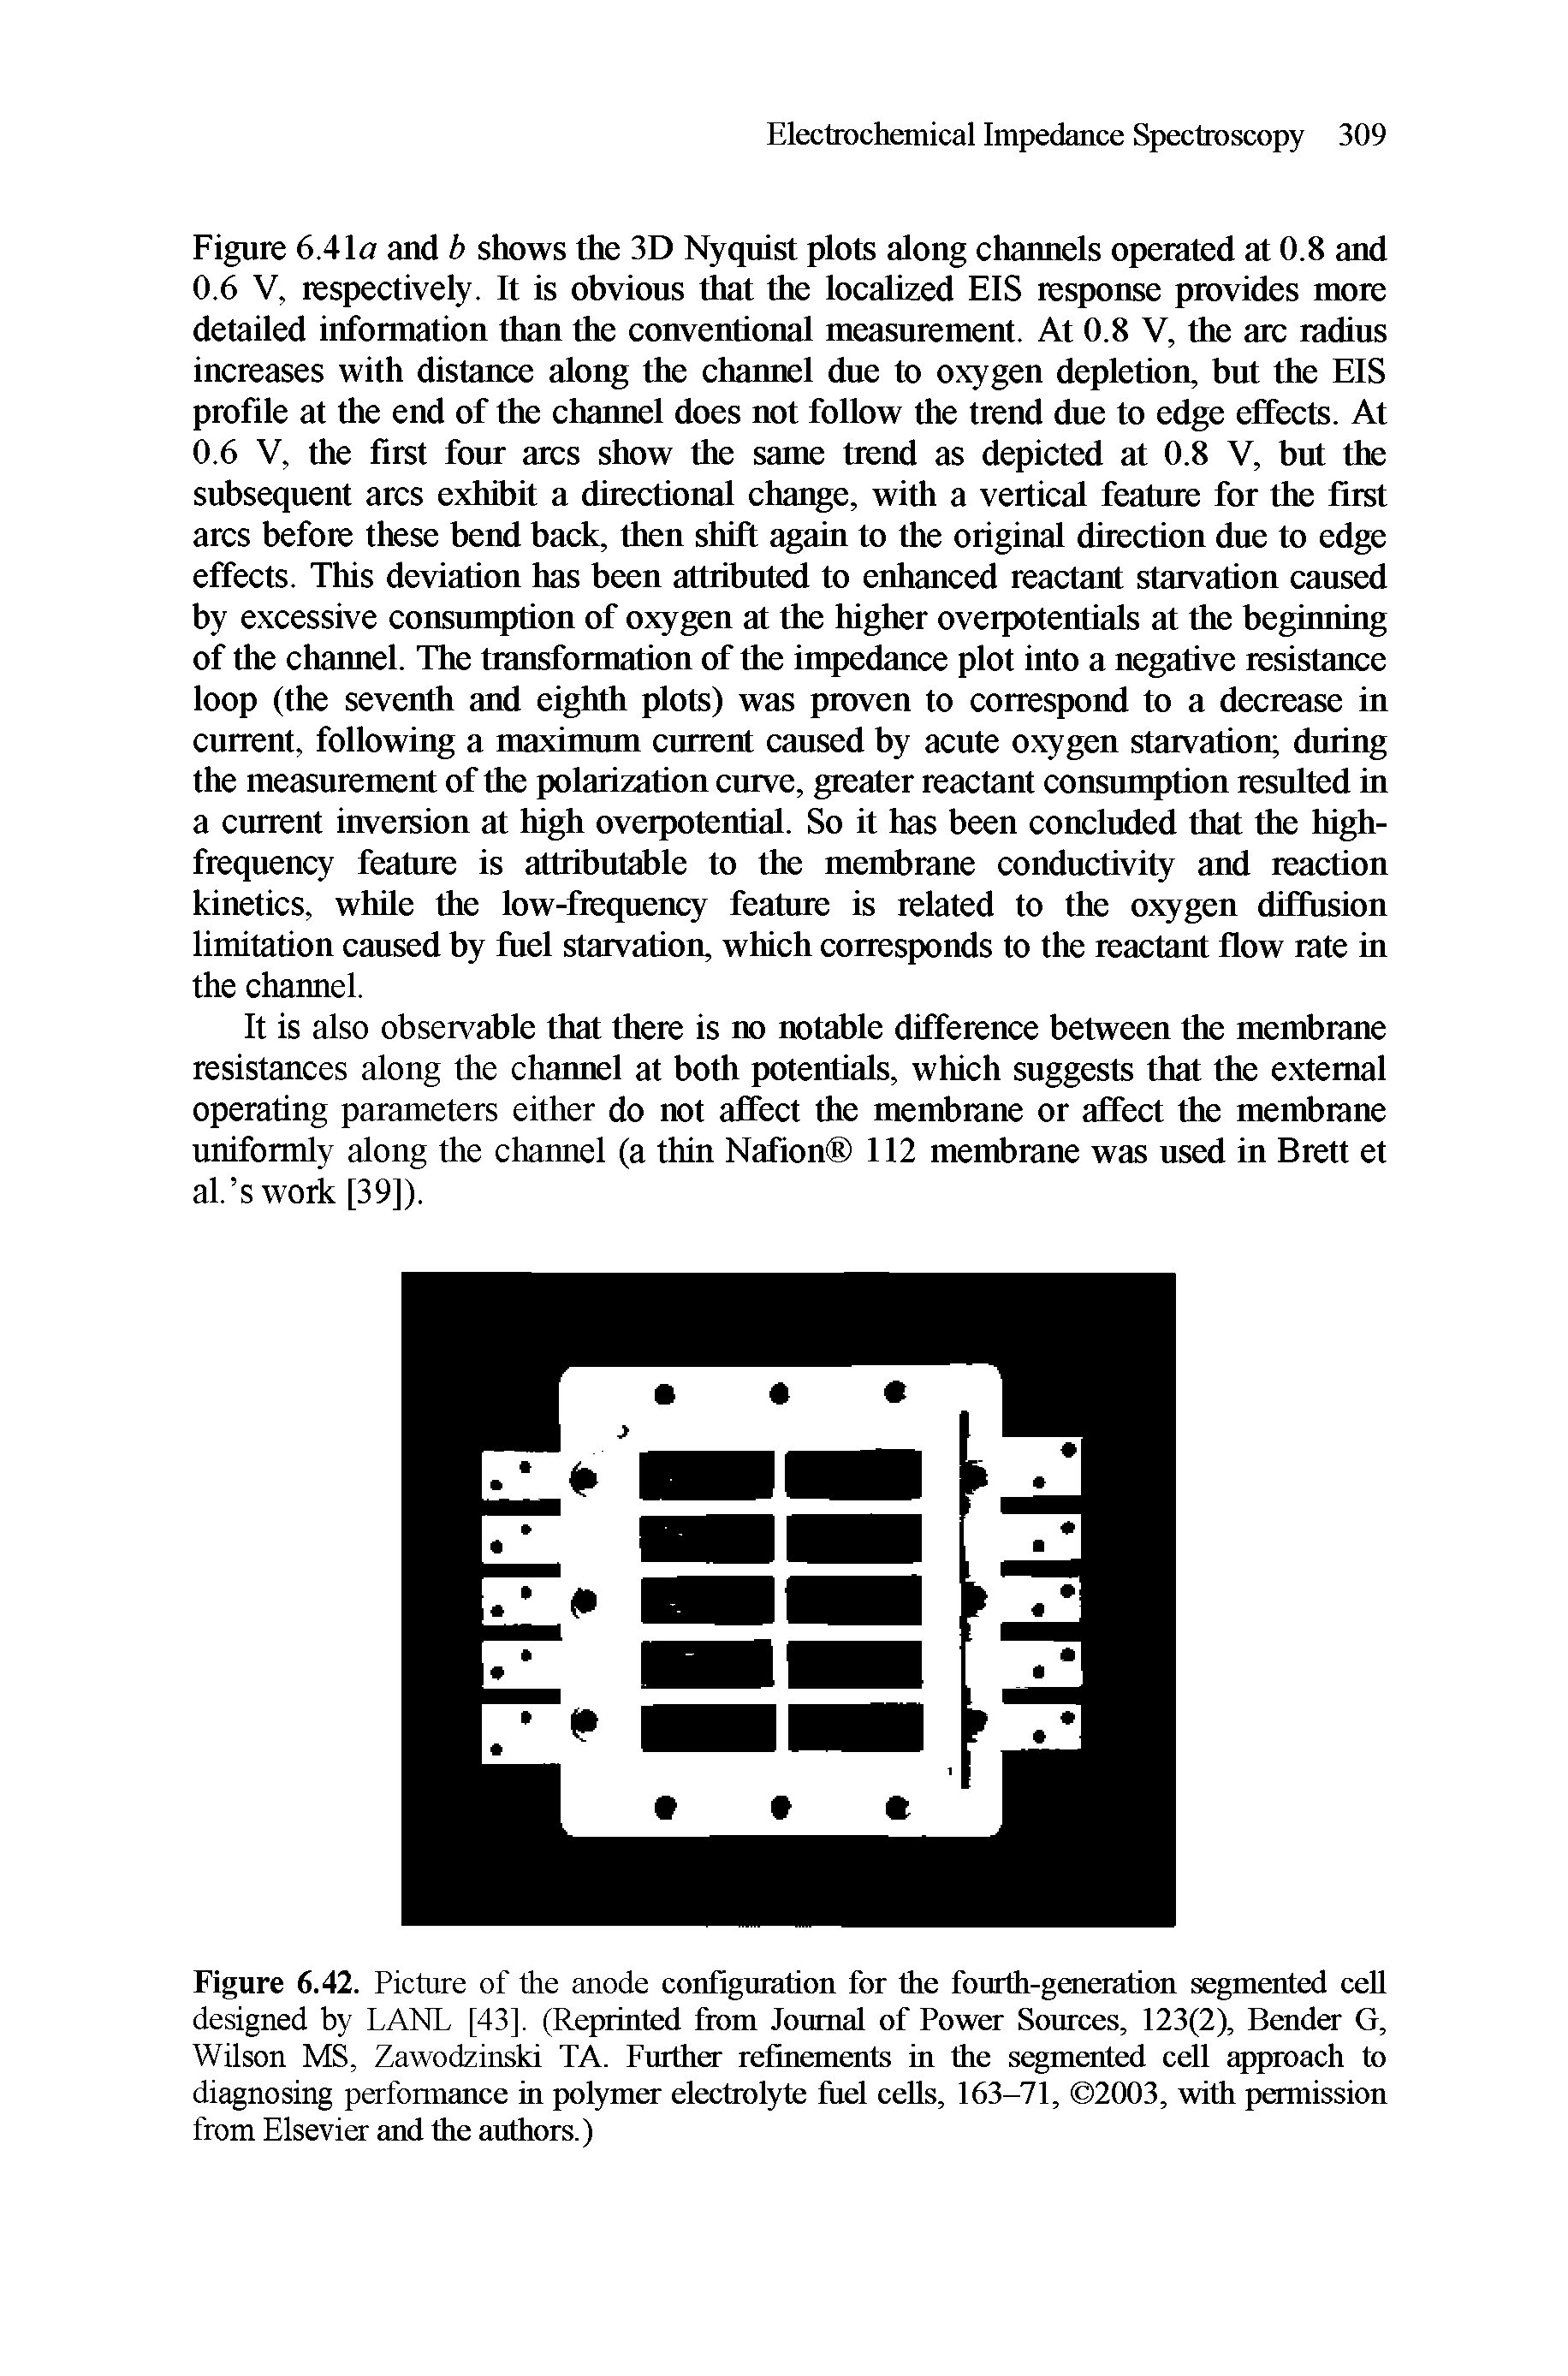 Figure 6.42. Picture of the anode configuration for the fourth-generation segmented cell designed by LANL [43], (Reprinted from Journal of Power Sources, 123(2), Bender G, Wilson MS, Zawodzinski TA. Further refinements in the segmented cell approach to diagnosing performance in polymer electrolyte fuel cells, 163-71, 2003, with permission from Elsevier and the authors.)...